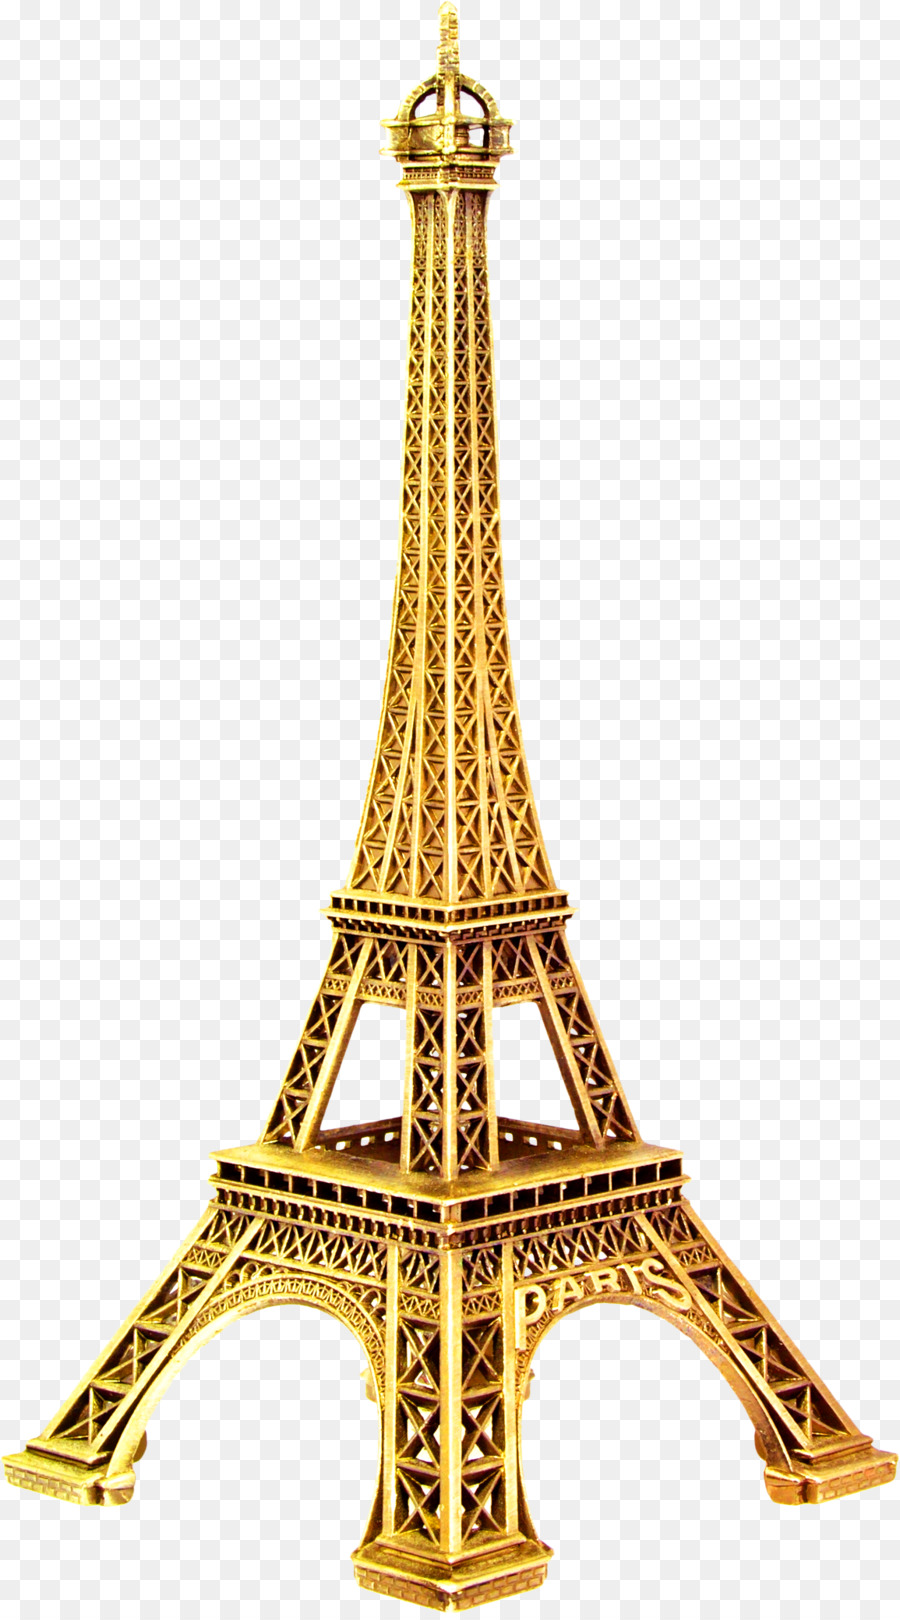 Eiffel Tower France Clipart / Eiffel tower Royalty Free Vector Image